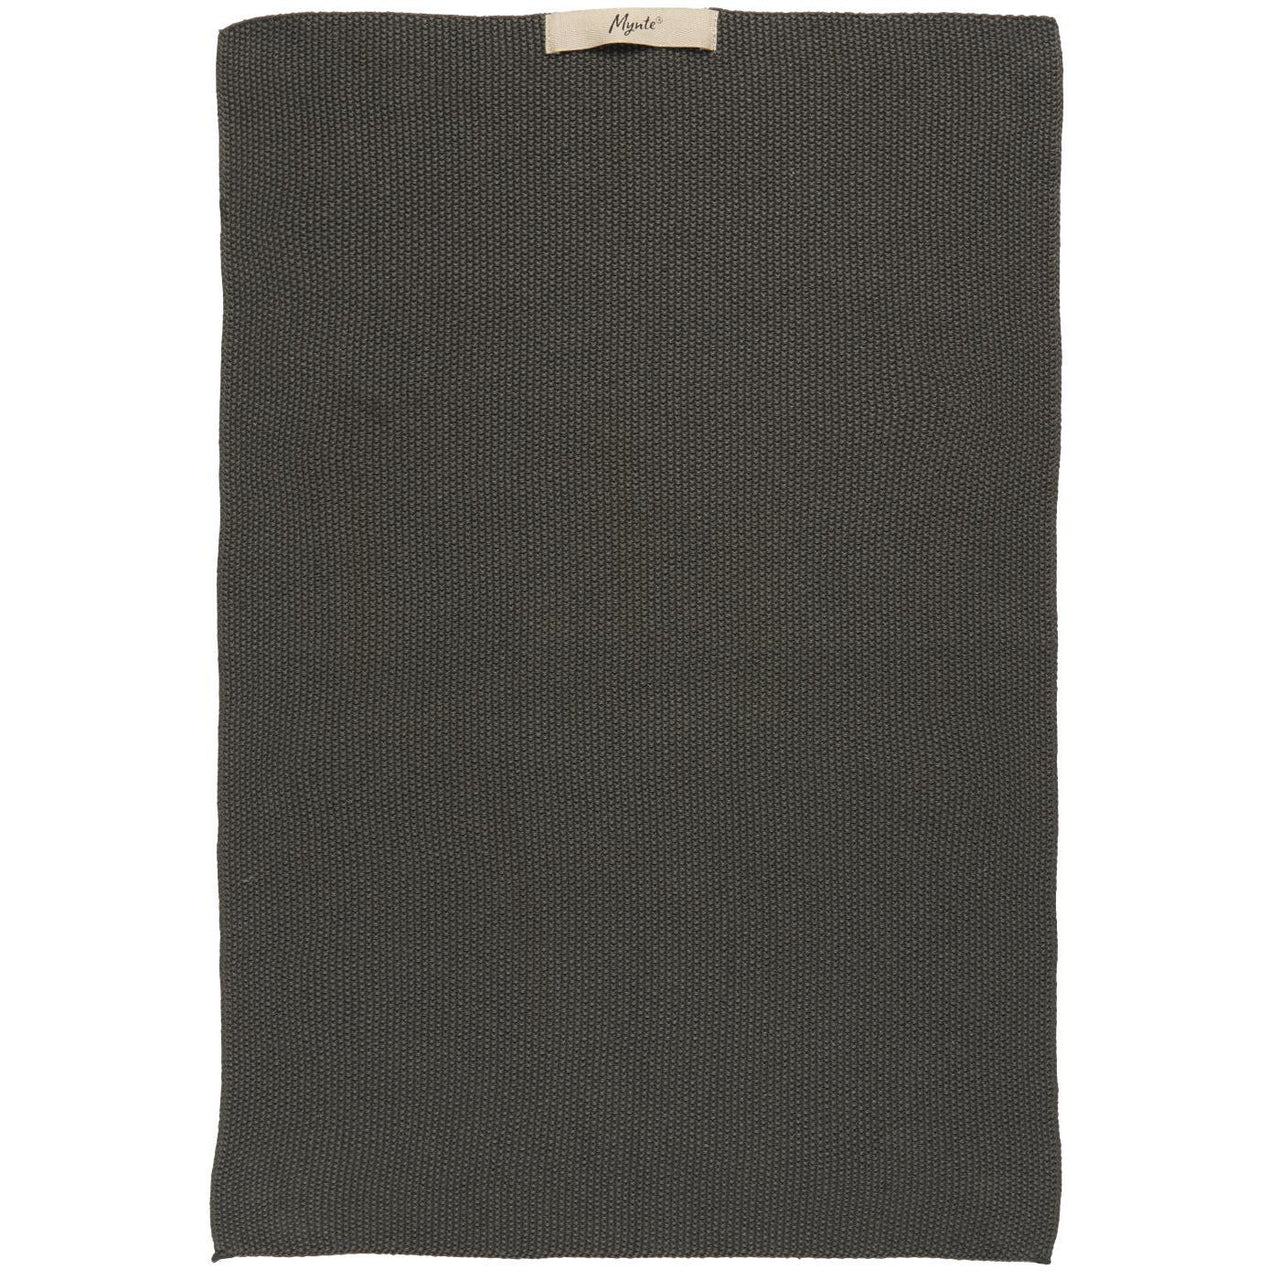 Towel Thunder Grey Knitted